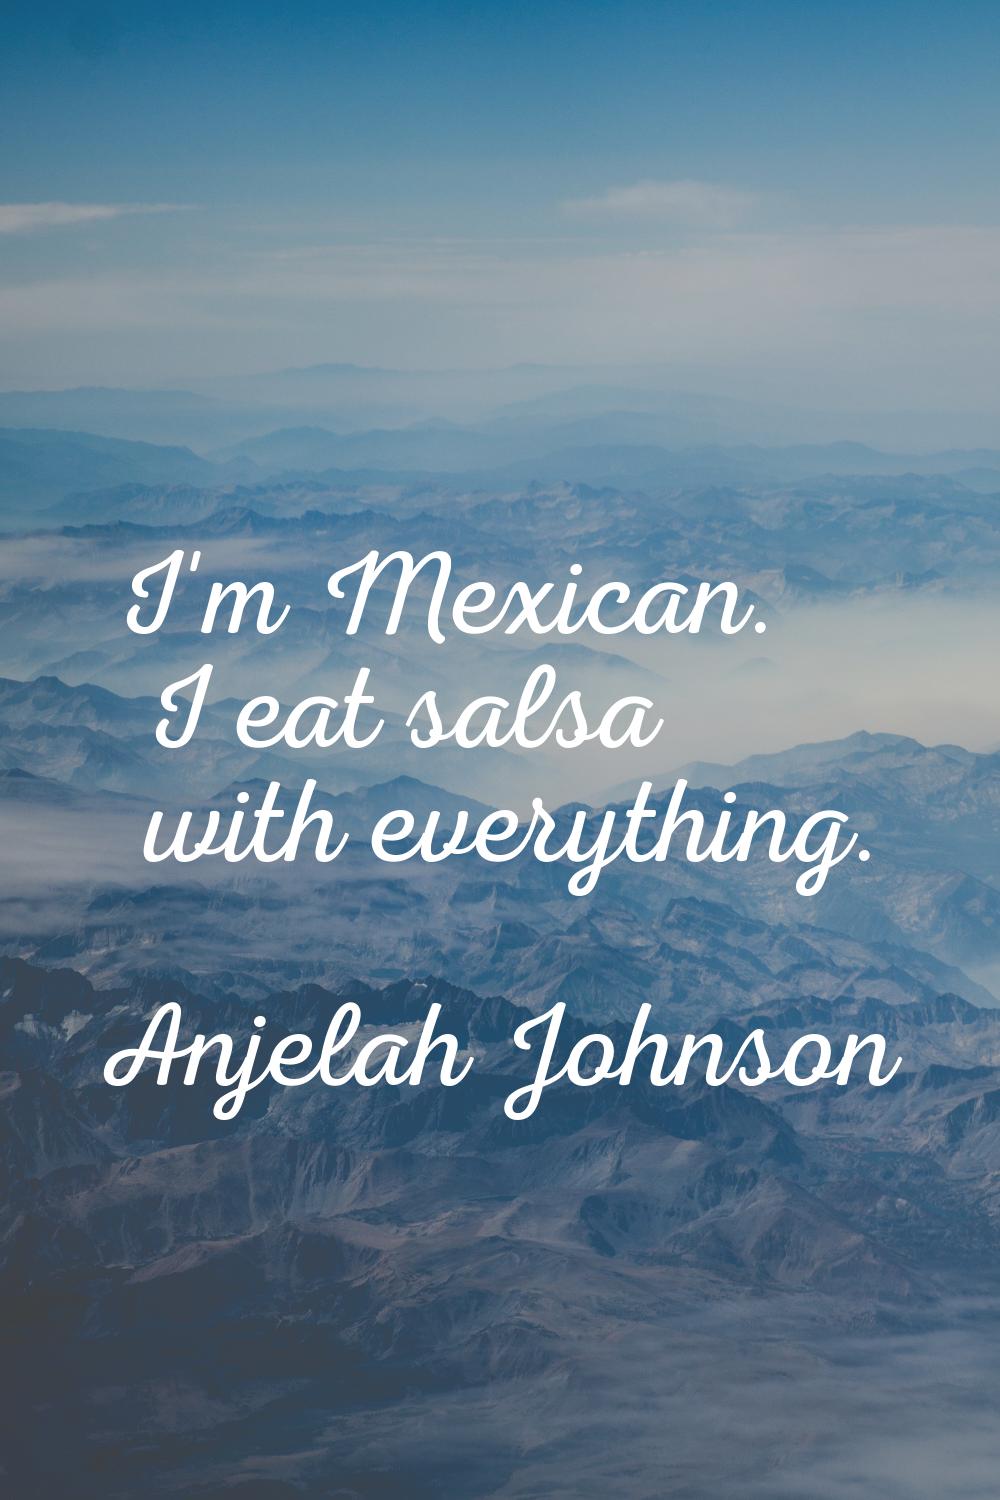 I'm Mexican. I eat salsa with everything.